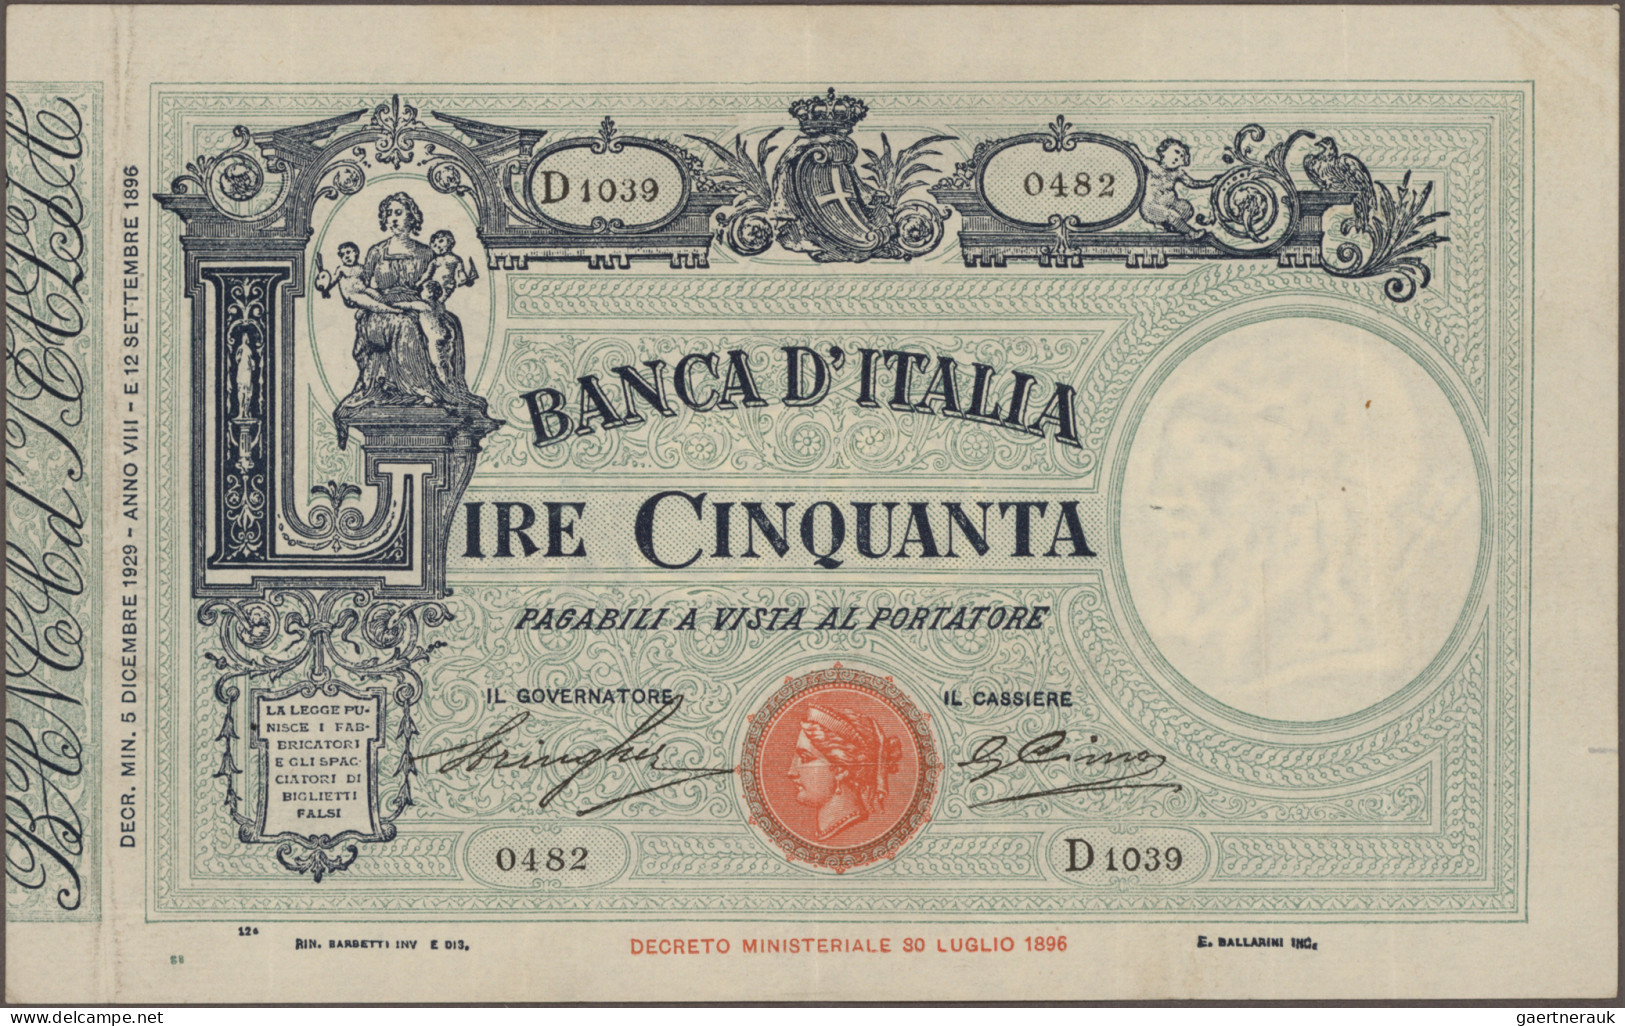 Italy: Banca d'Italia, Allied Military Currency and State & Treasury Notes, gian